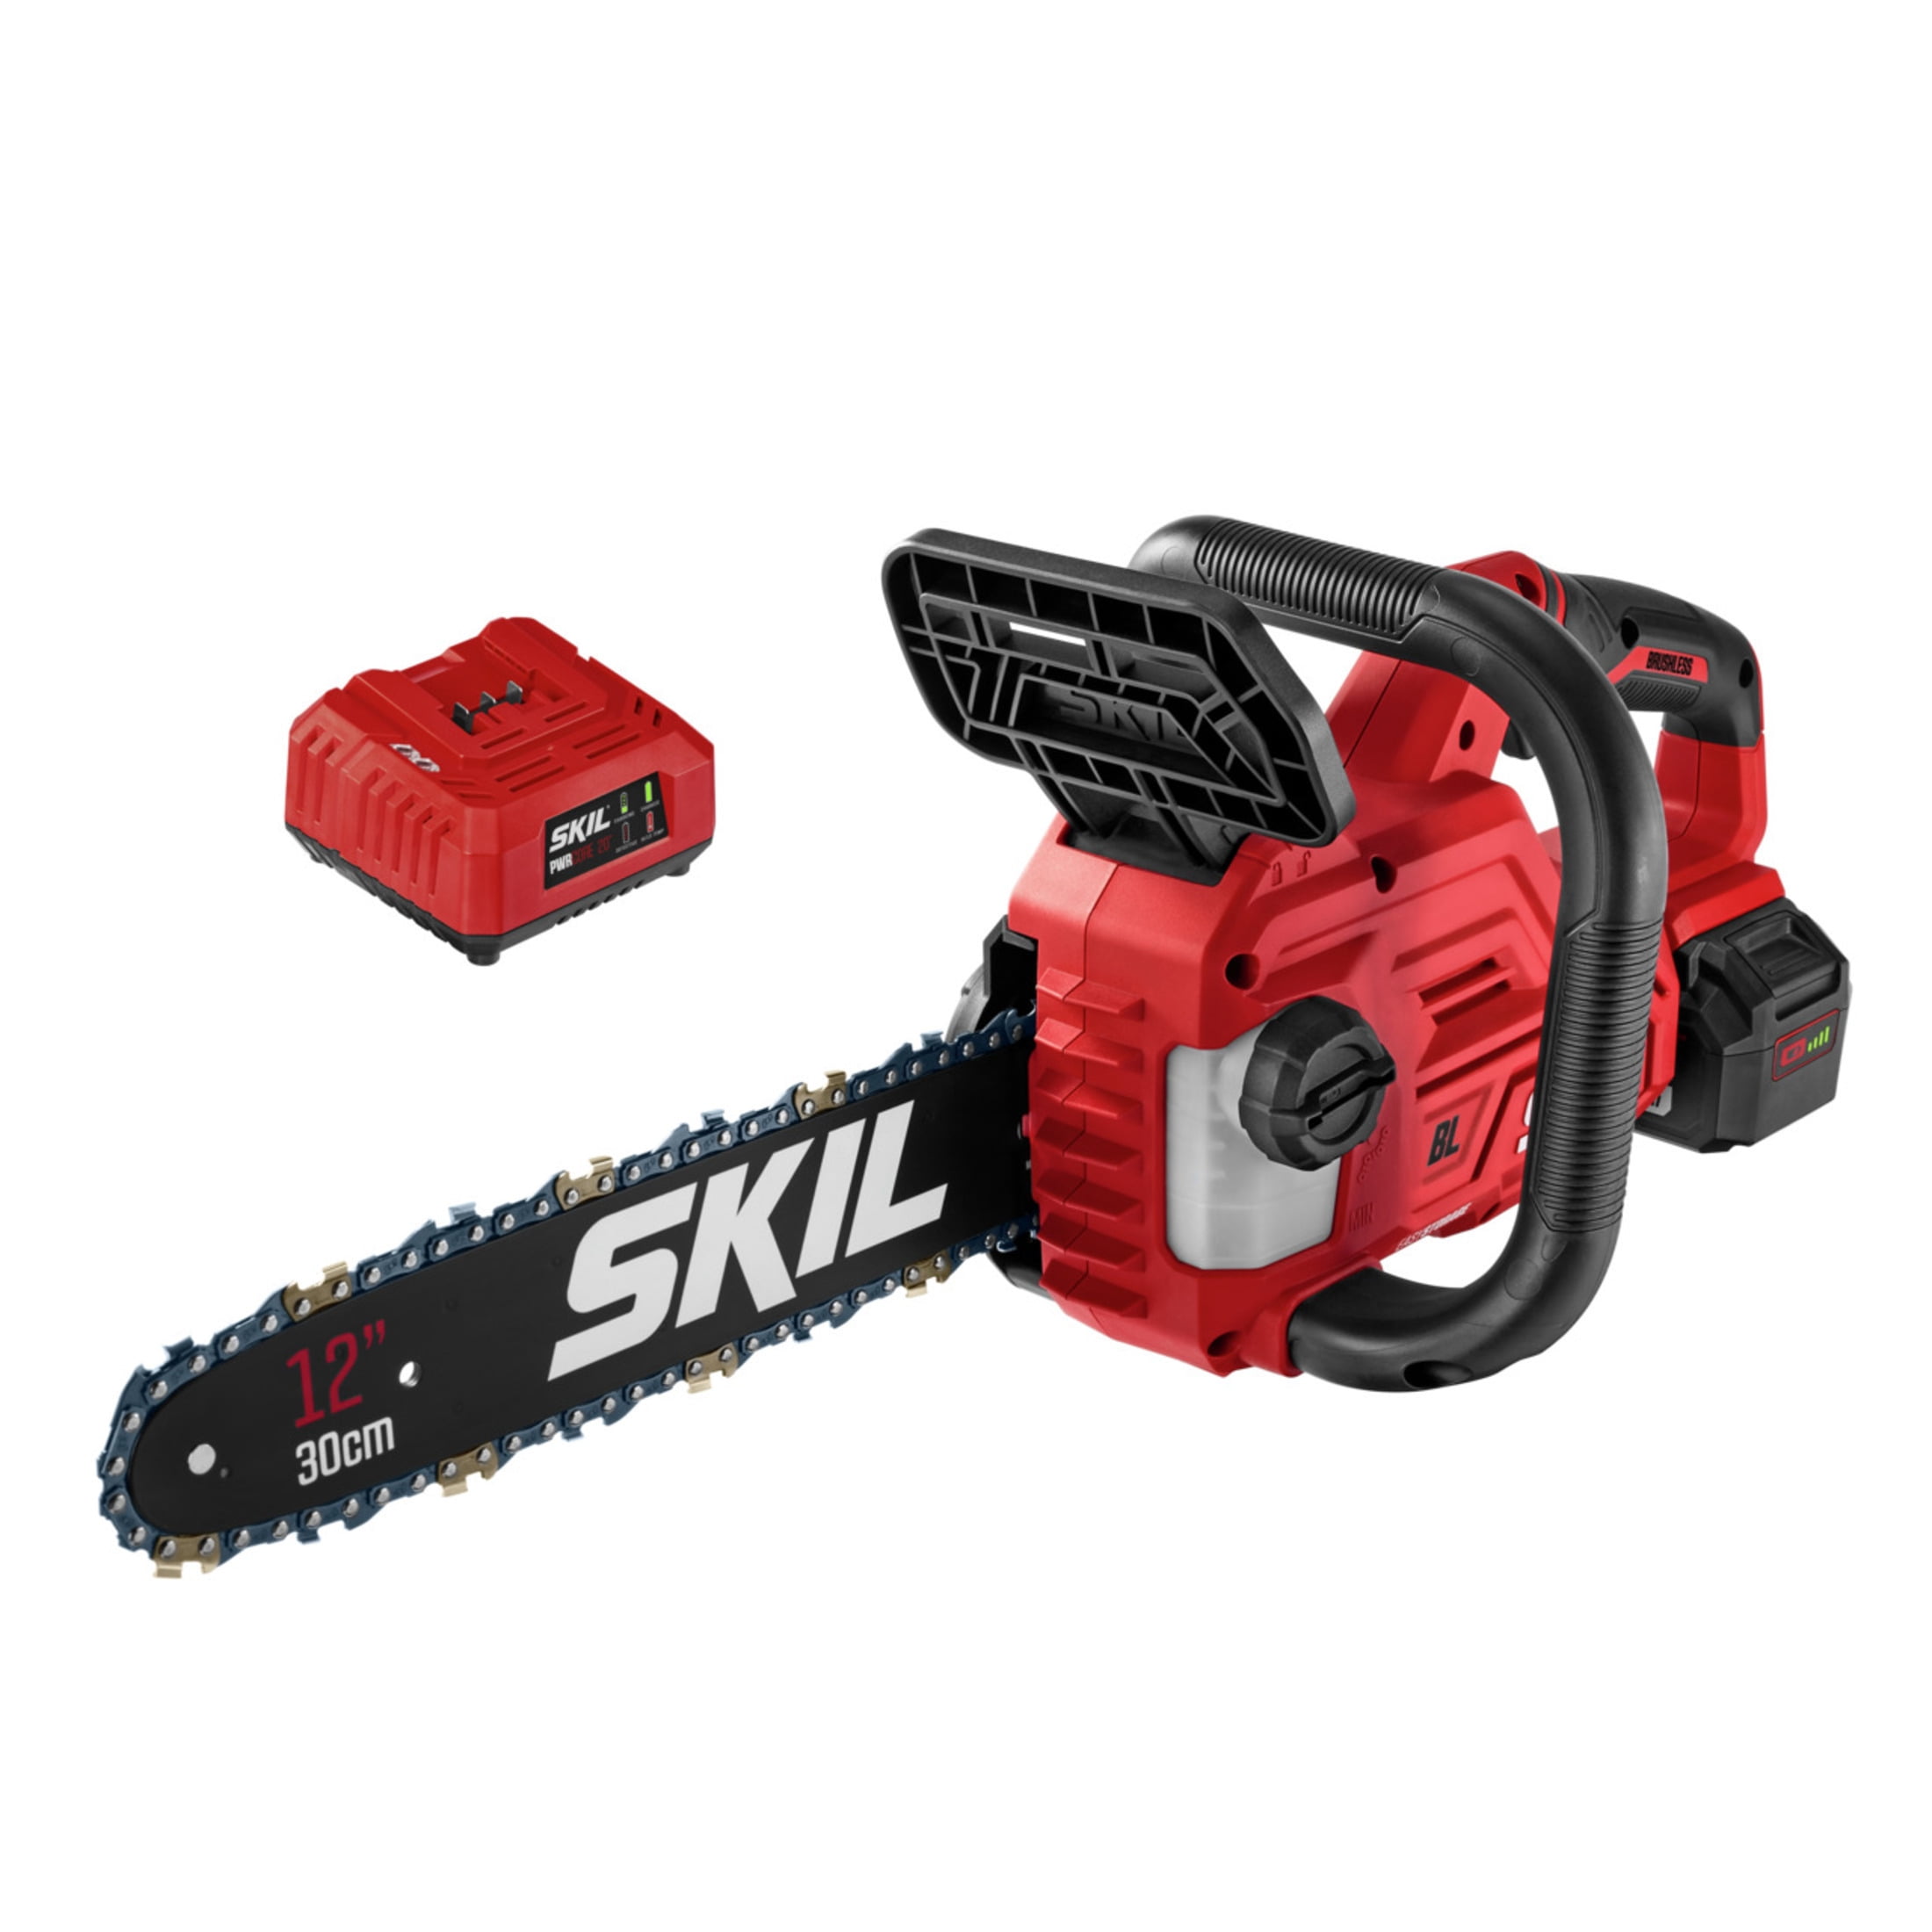 20V Battery & Fast Charger & A Complimentary Chain Included 20V 4Ah Battery Chainsaw Electric Chainsaw PowerSmart Chainsaw,12-Inch Cordless Chainsaw 